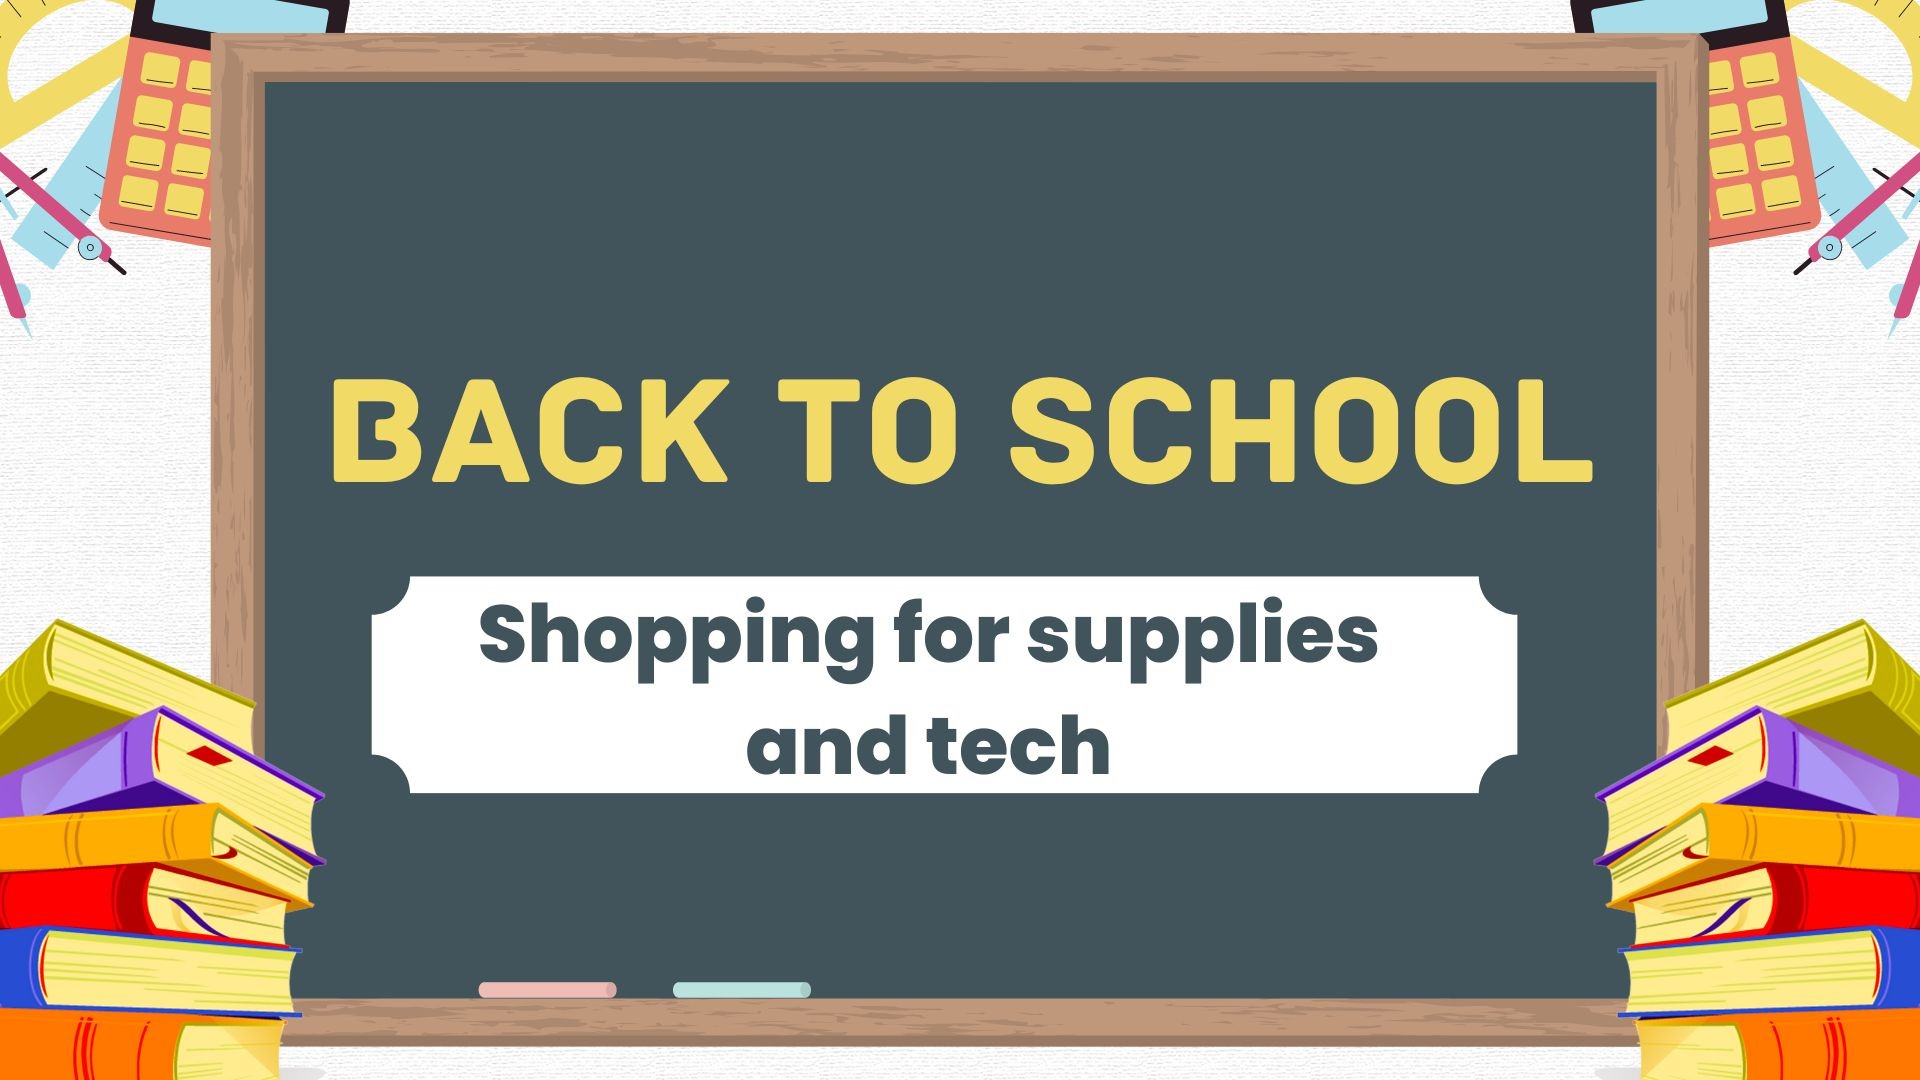 Tips and tricks to finding back-to-school bargains and how to save when buying all kinds of school supplies for this year.